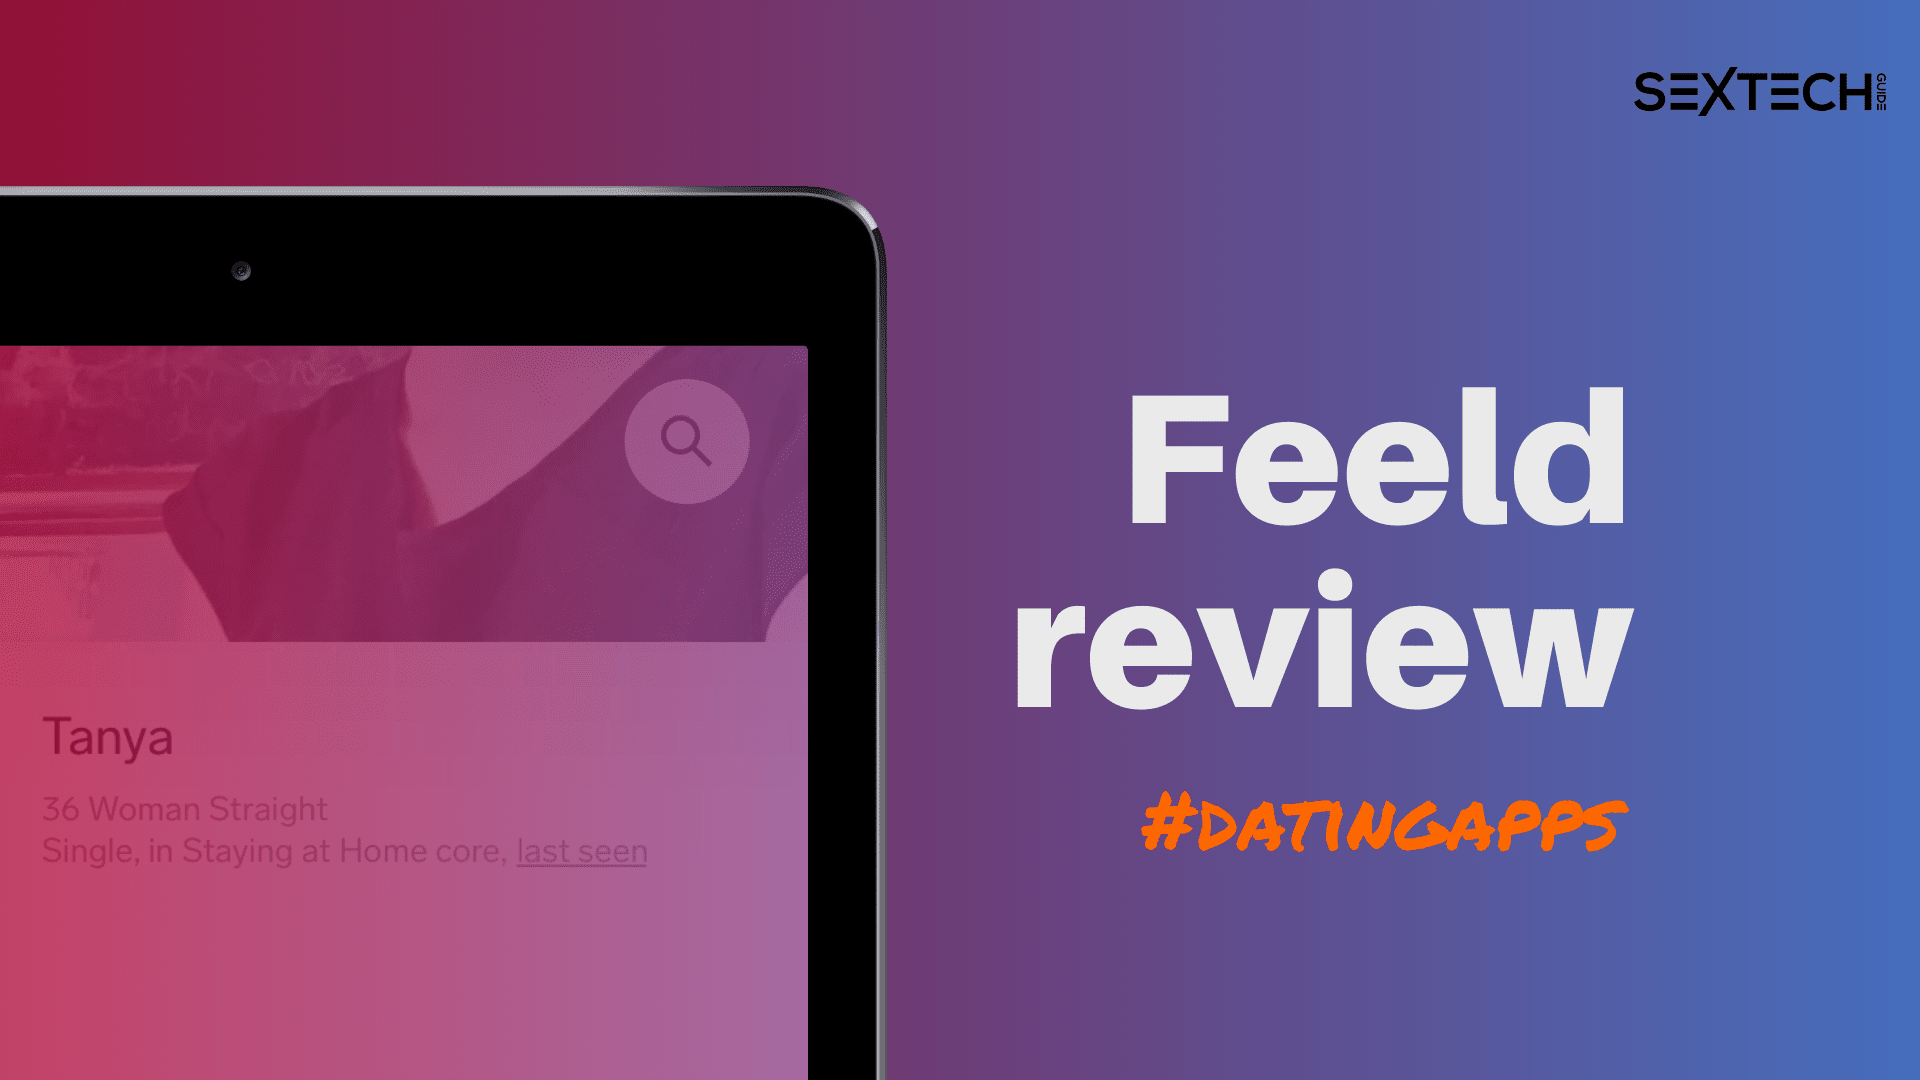 A tablet showcasing the Feeld review for the popular Feeld dating app.